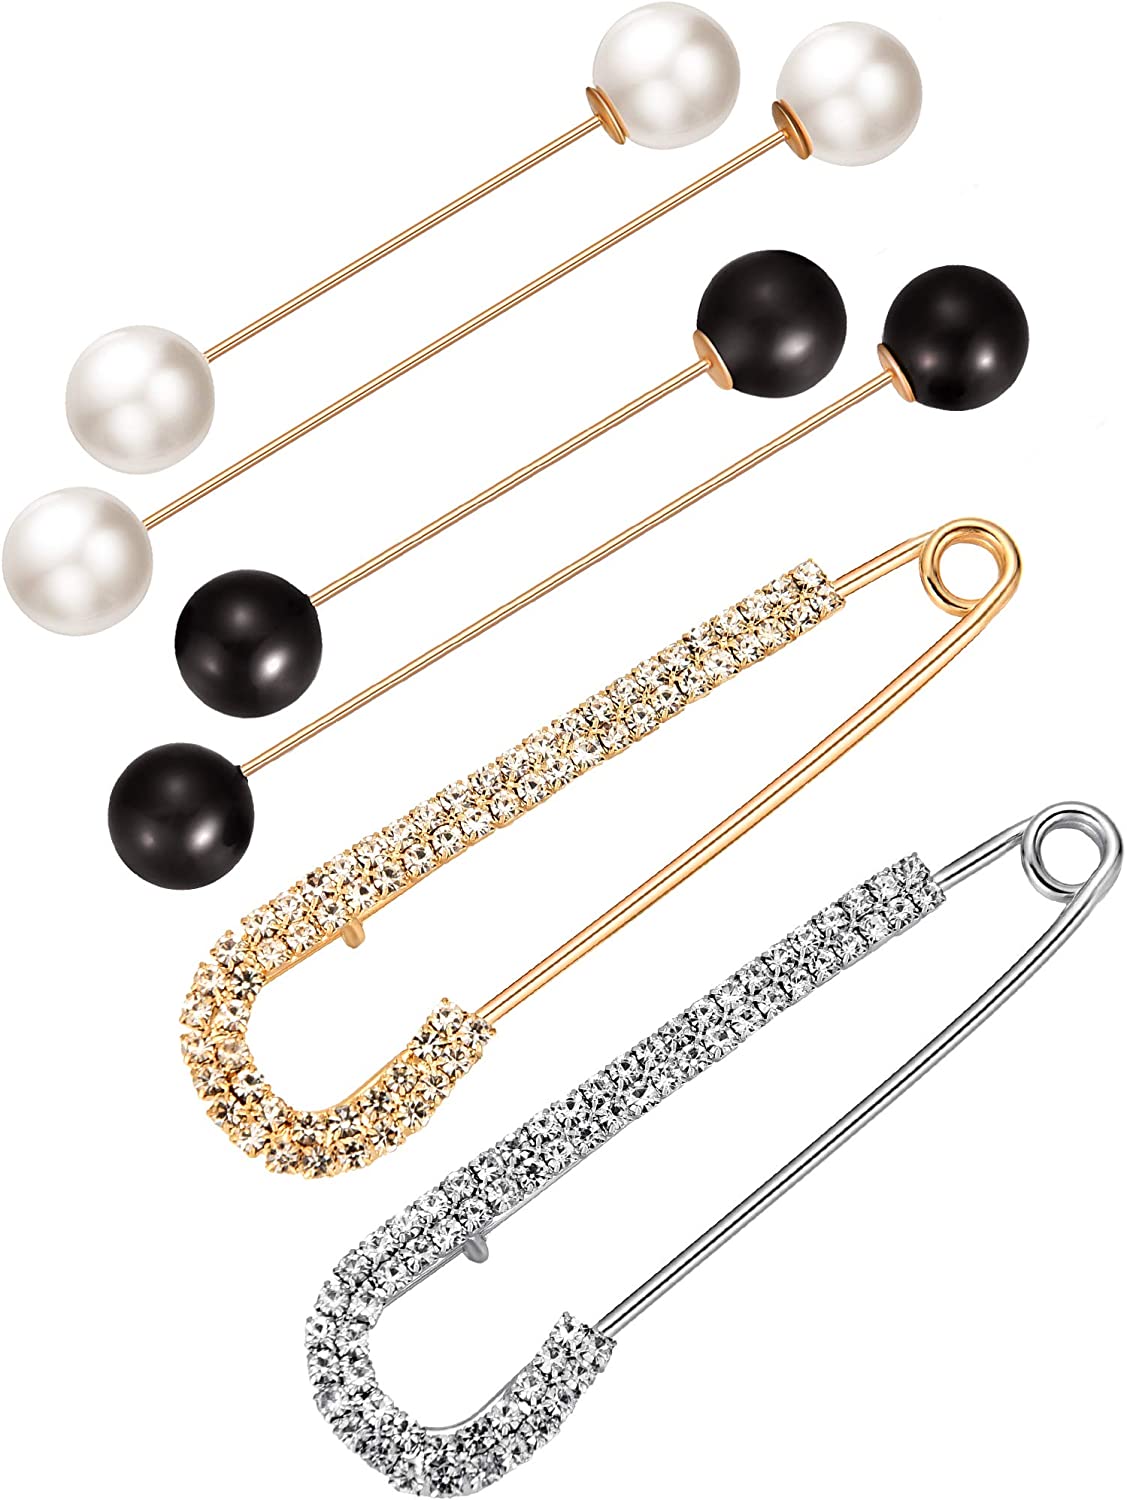 6 Pieces Sweater Shawl Clips Set, Include Double Faux Pearl Brooch Pins and Crystal Shawl Clips for Women Girls Costume Accessory